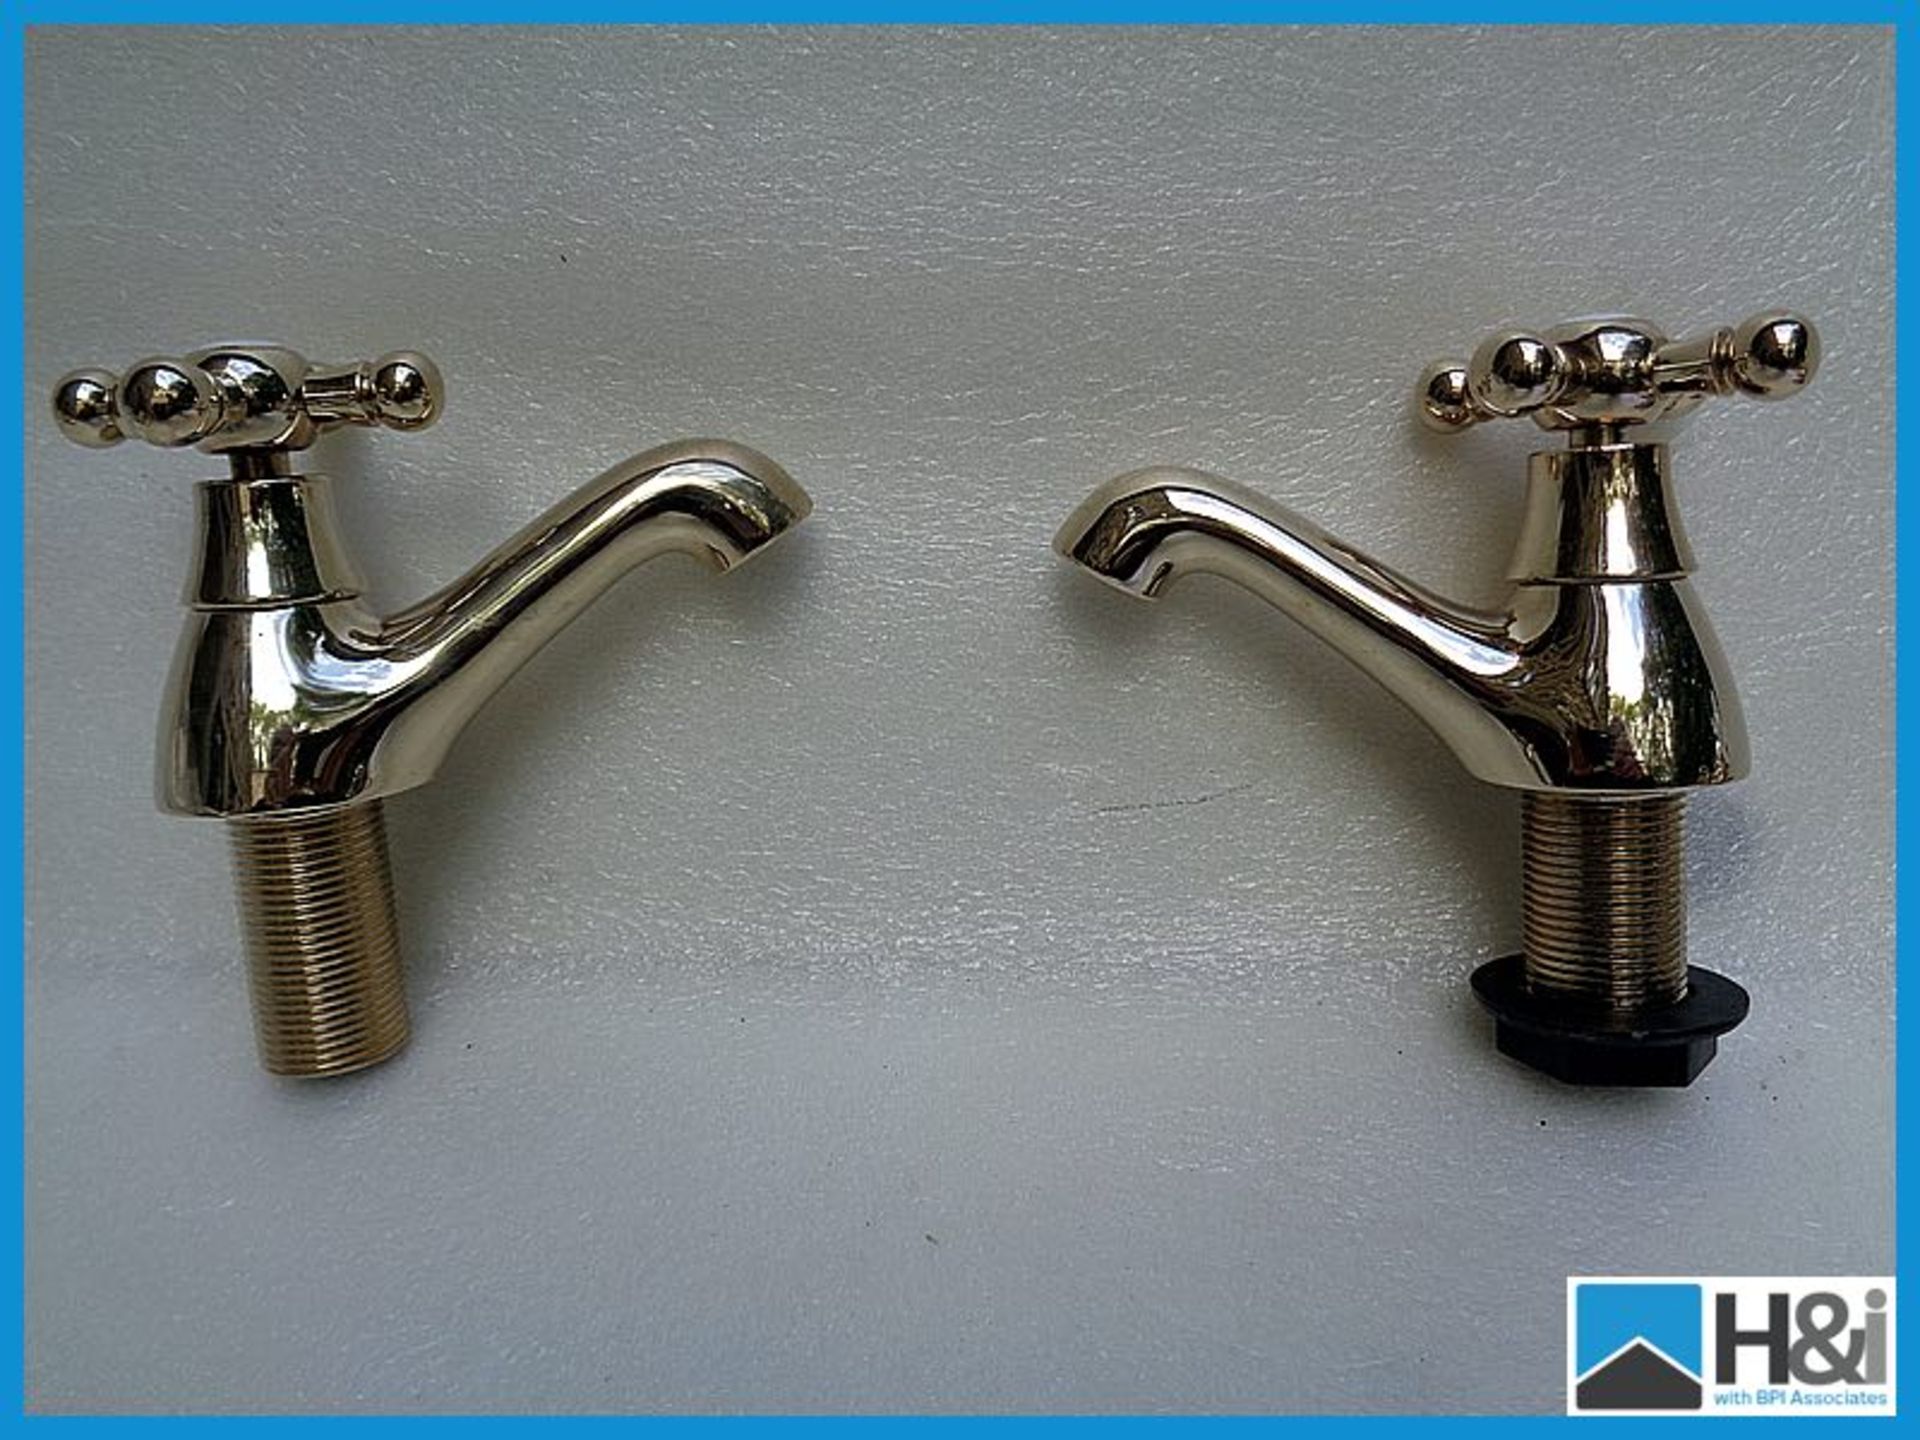 1 x pr Traditional bath taps Antique Gold RRP GBP 89.00 Appraisal: Good Serial No: NA Location: H&I,